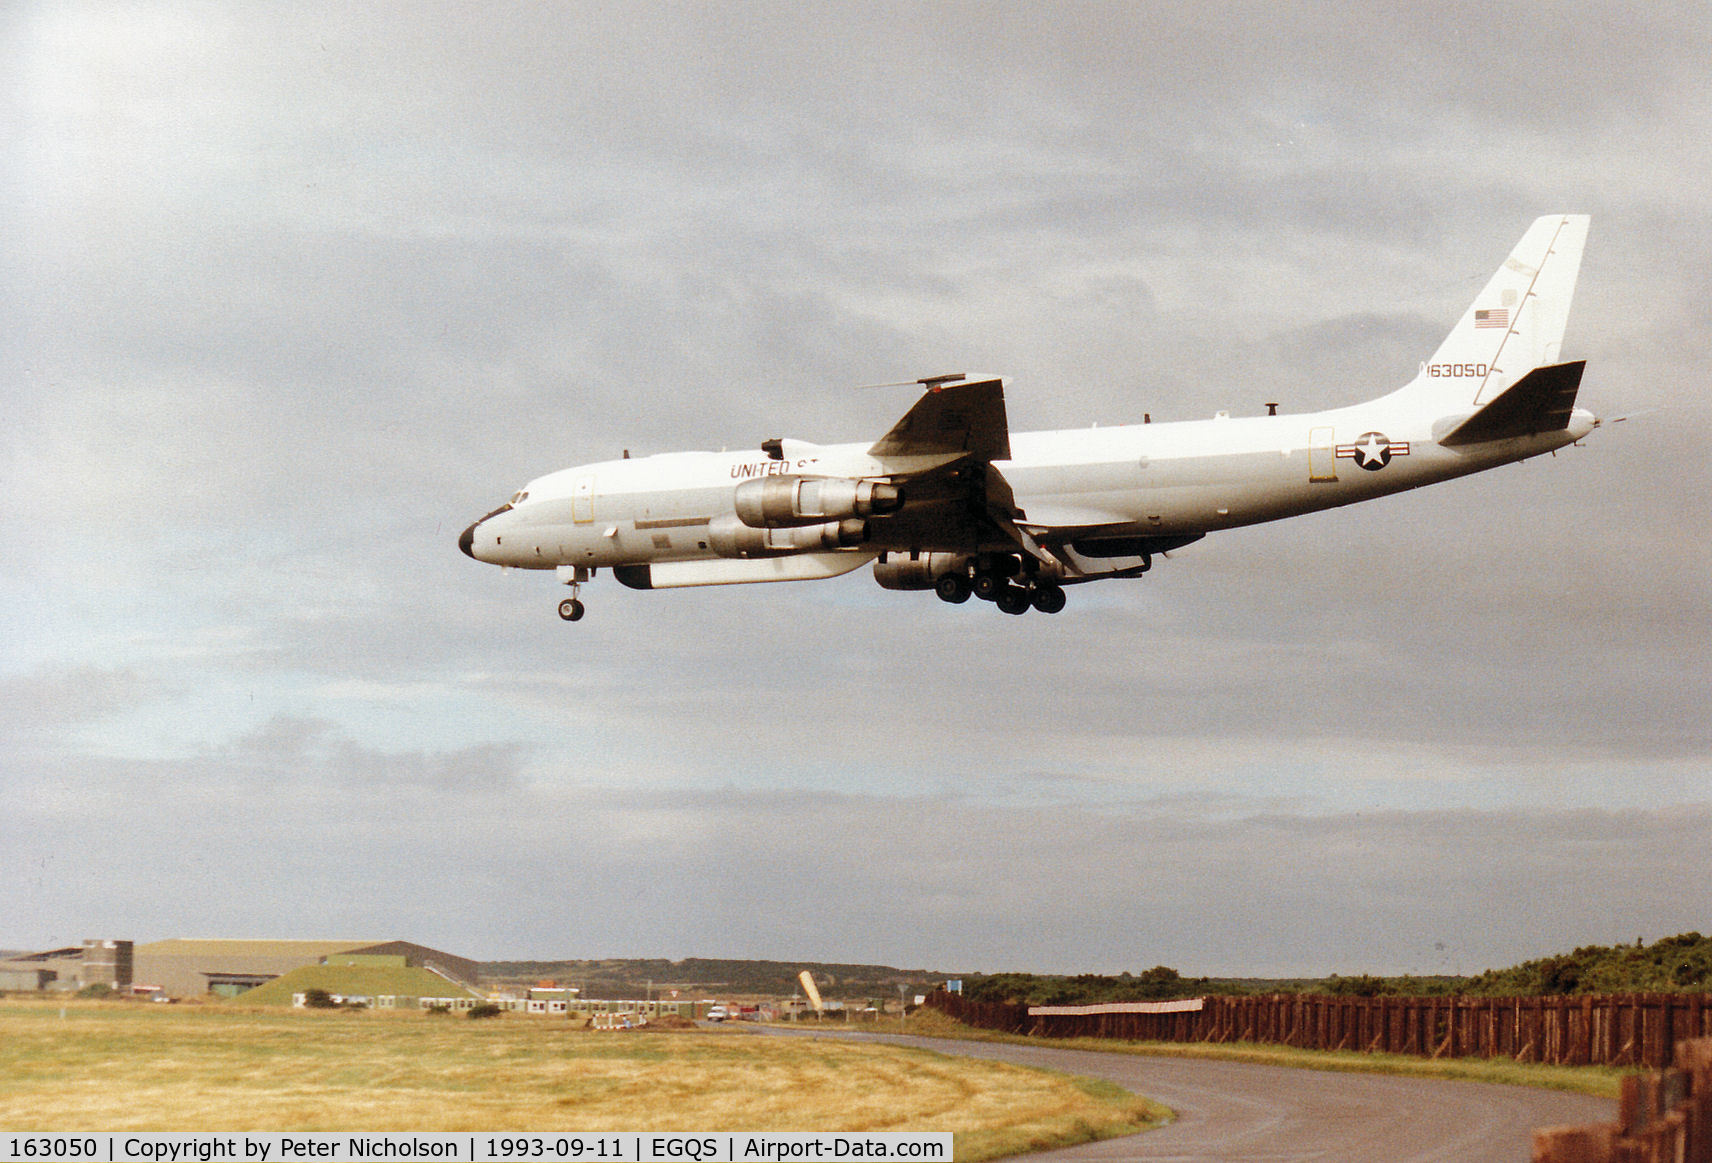 163050, 1966 McDonnell Douglas EC-24A (DC-8-54F) C/N 45881, EC-24A of the US Navy's Fleet Electronic Warfare Support Group (FEWSG) landing at RAF Lossiemouth in September 1993.